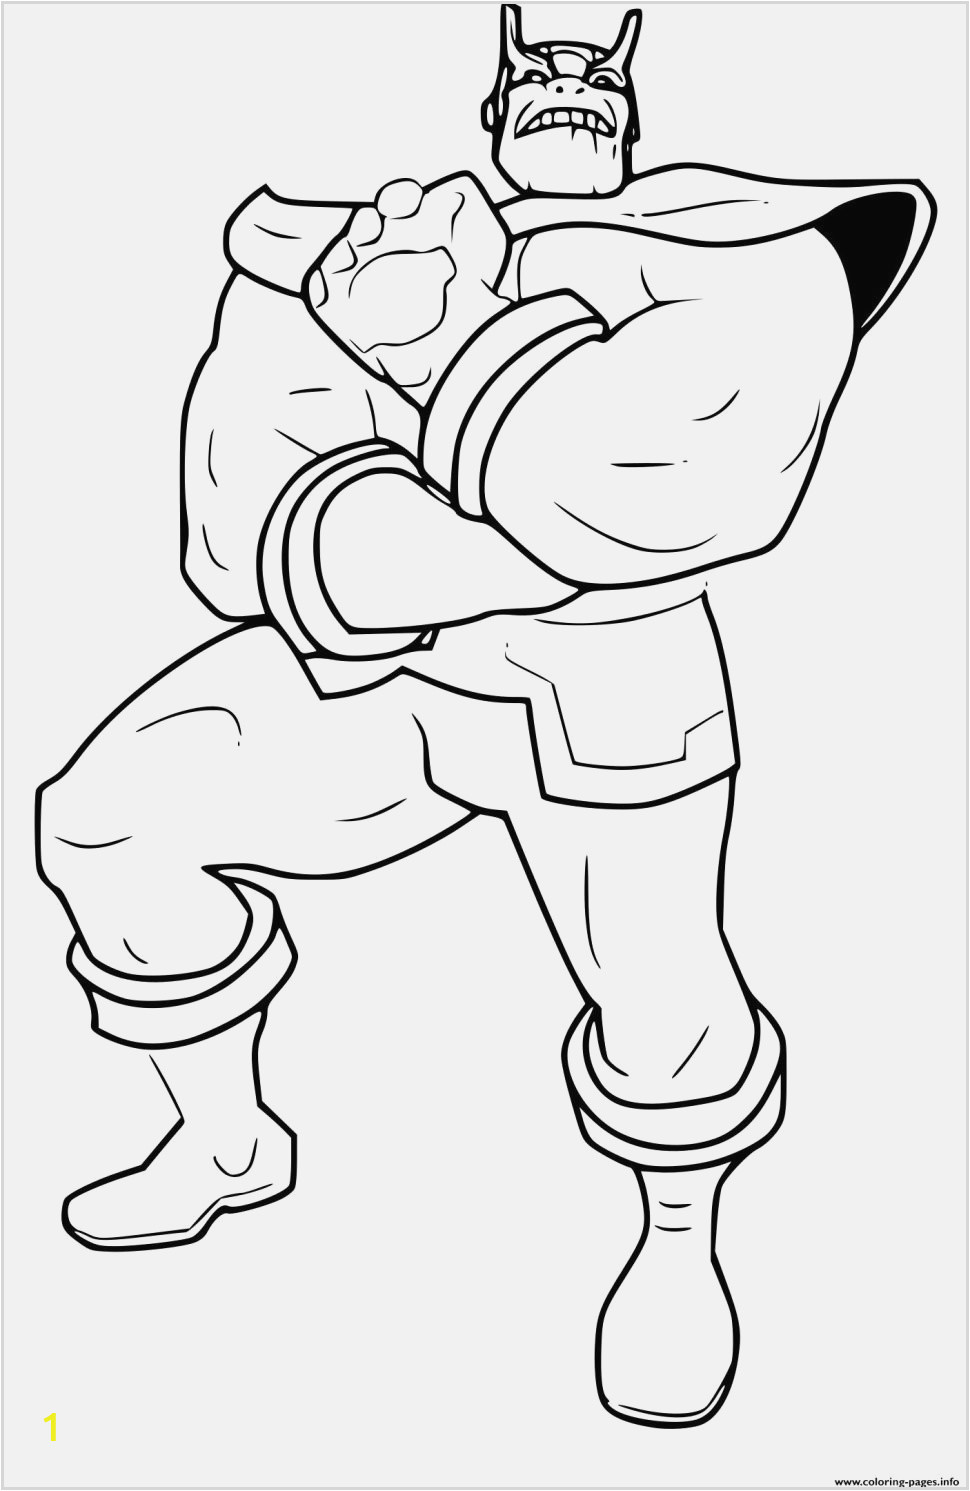 Thanos Printable Coloring Pages Lego Marvel Printable Coloring Pages at Coloring Pages